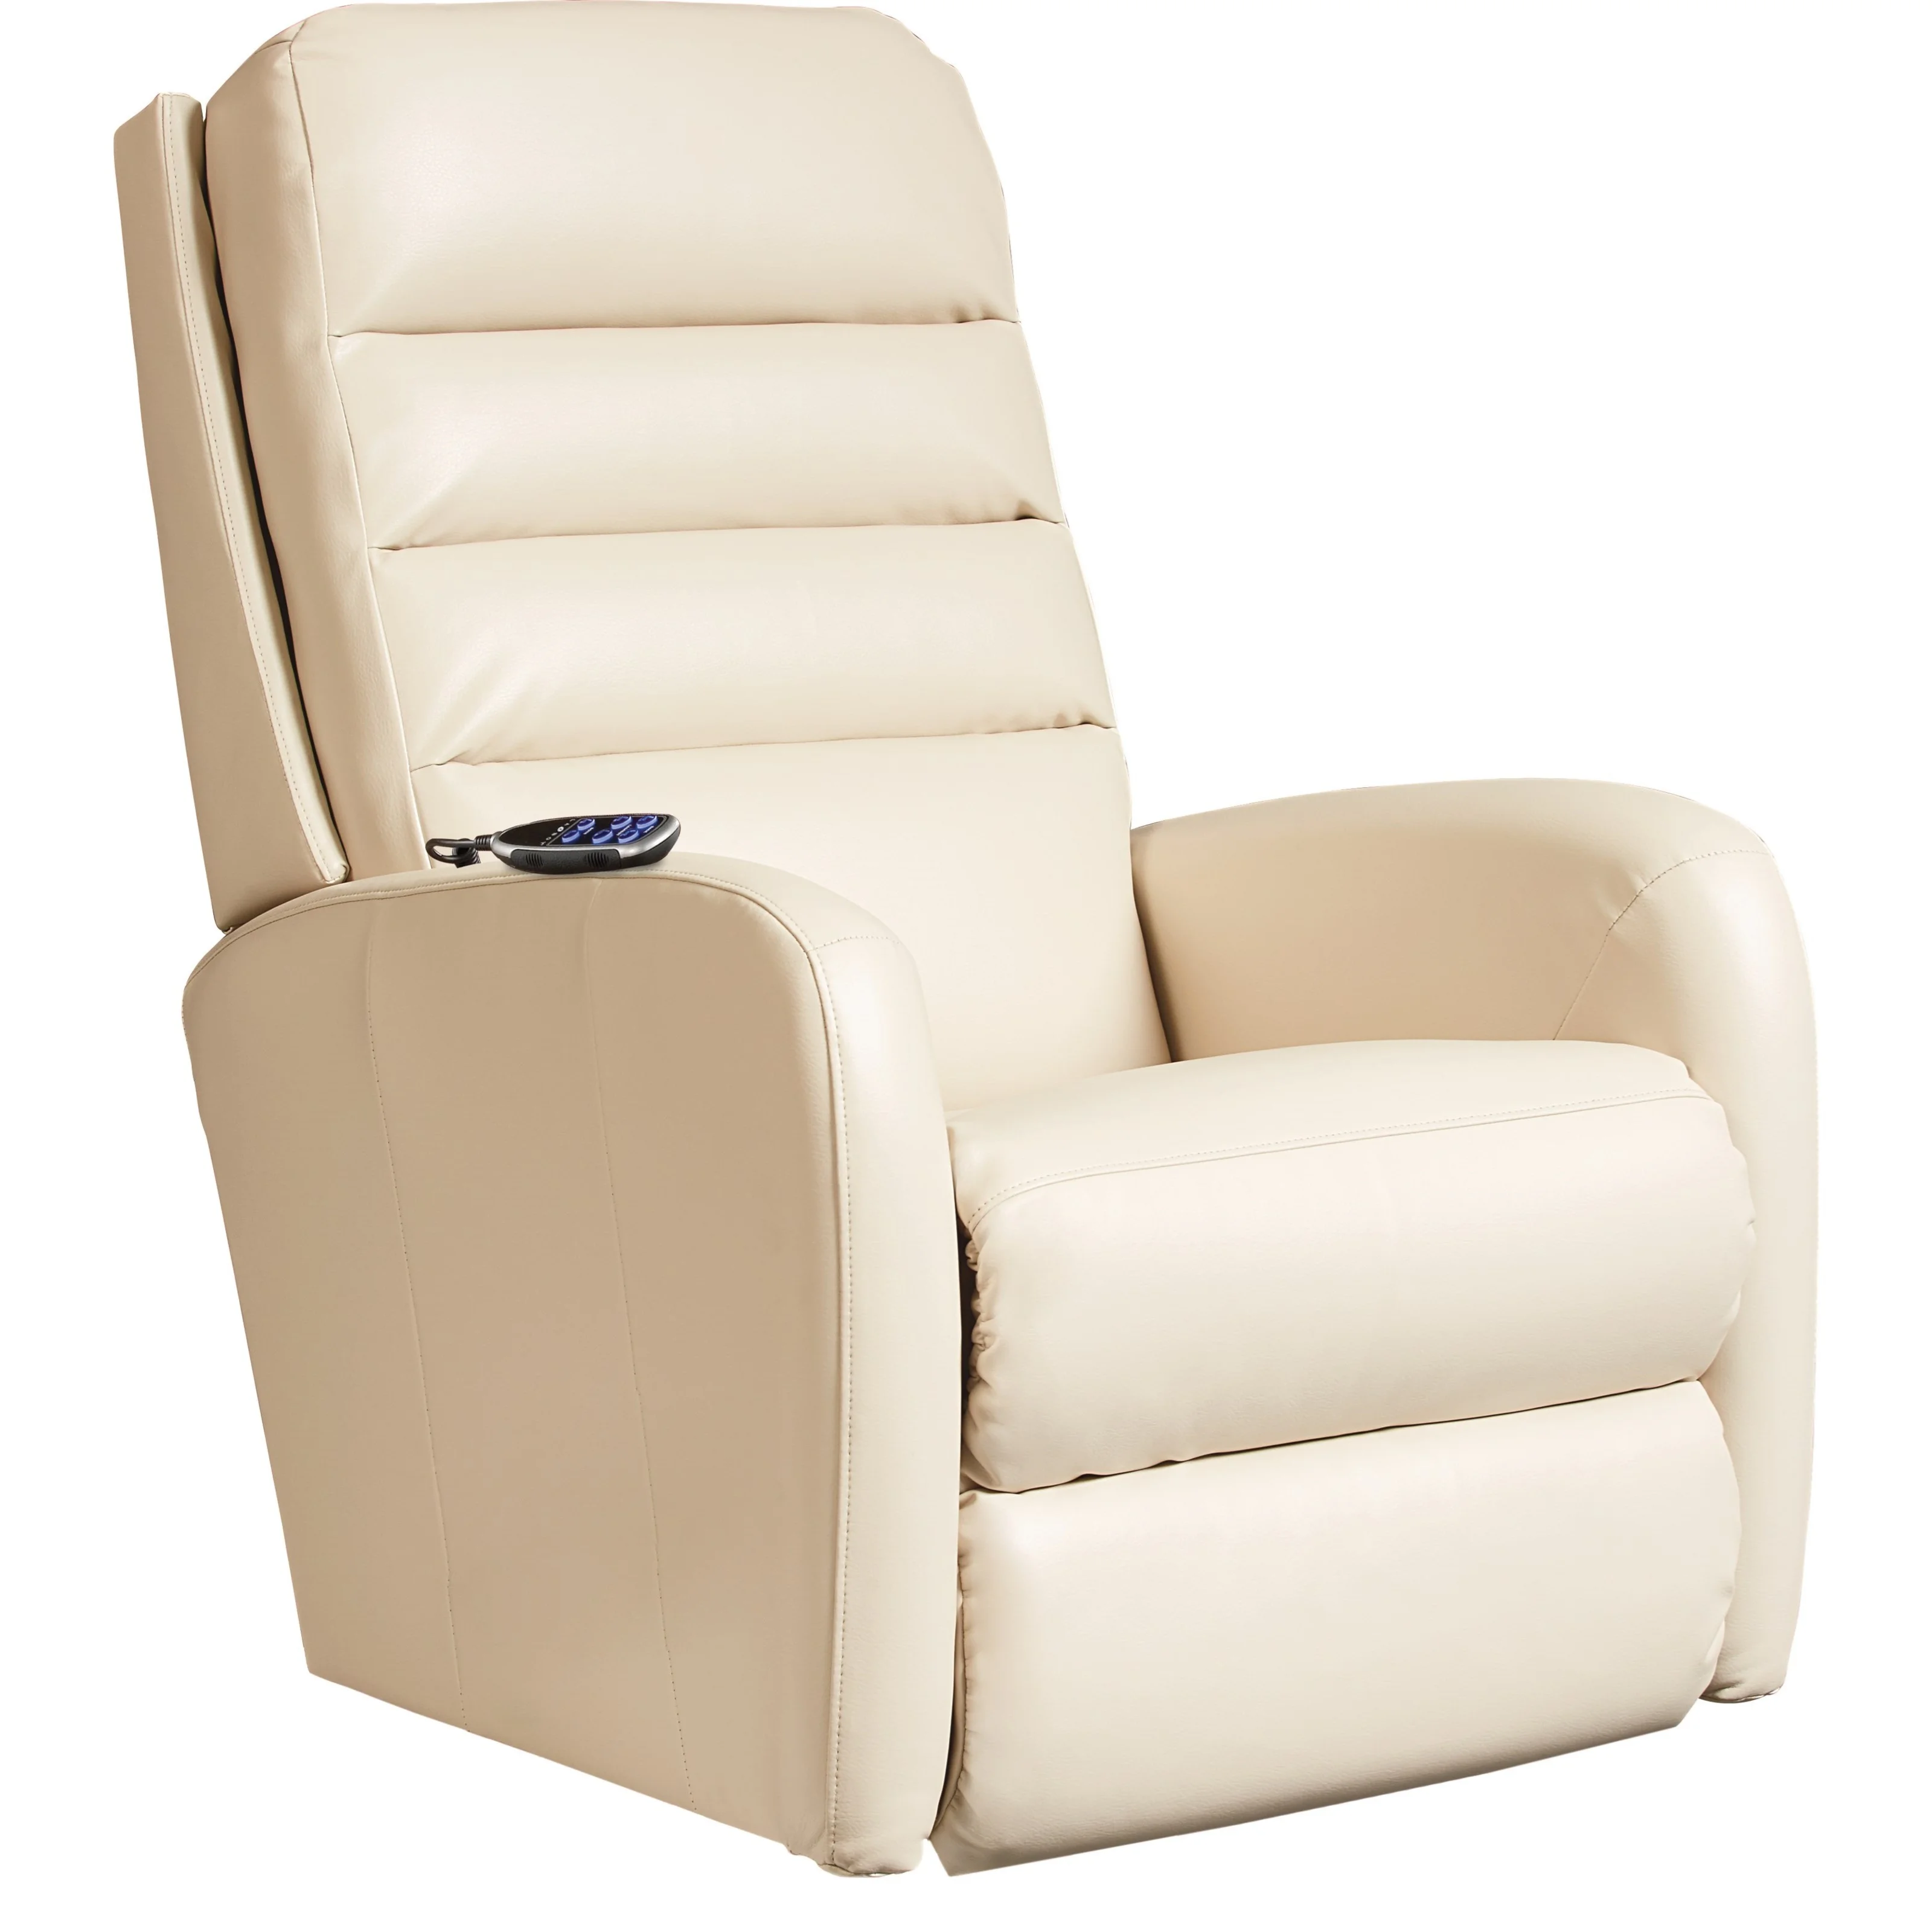 Why a La-Z-Boy rocking recliner is better for pregnant women or